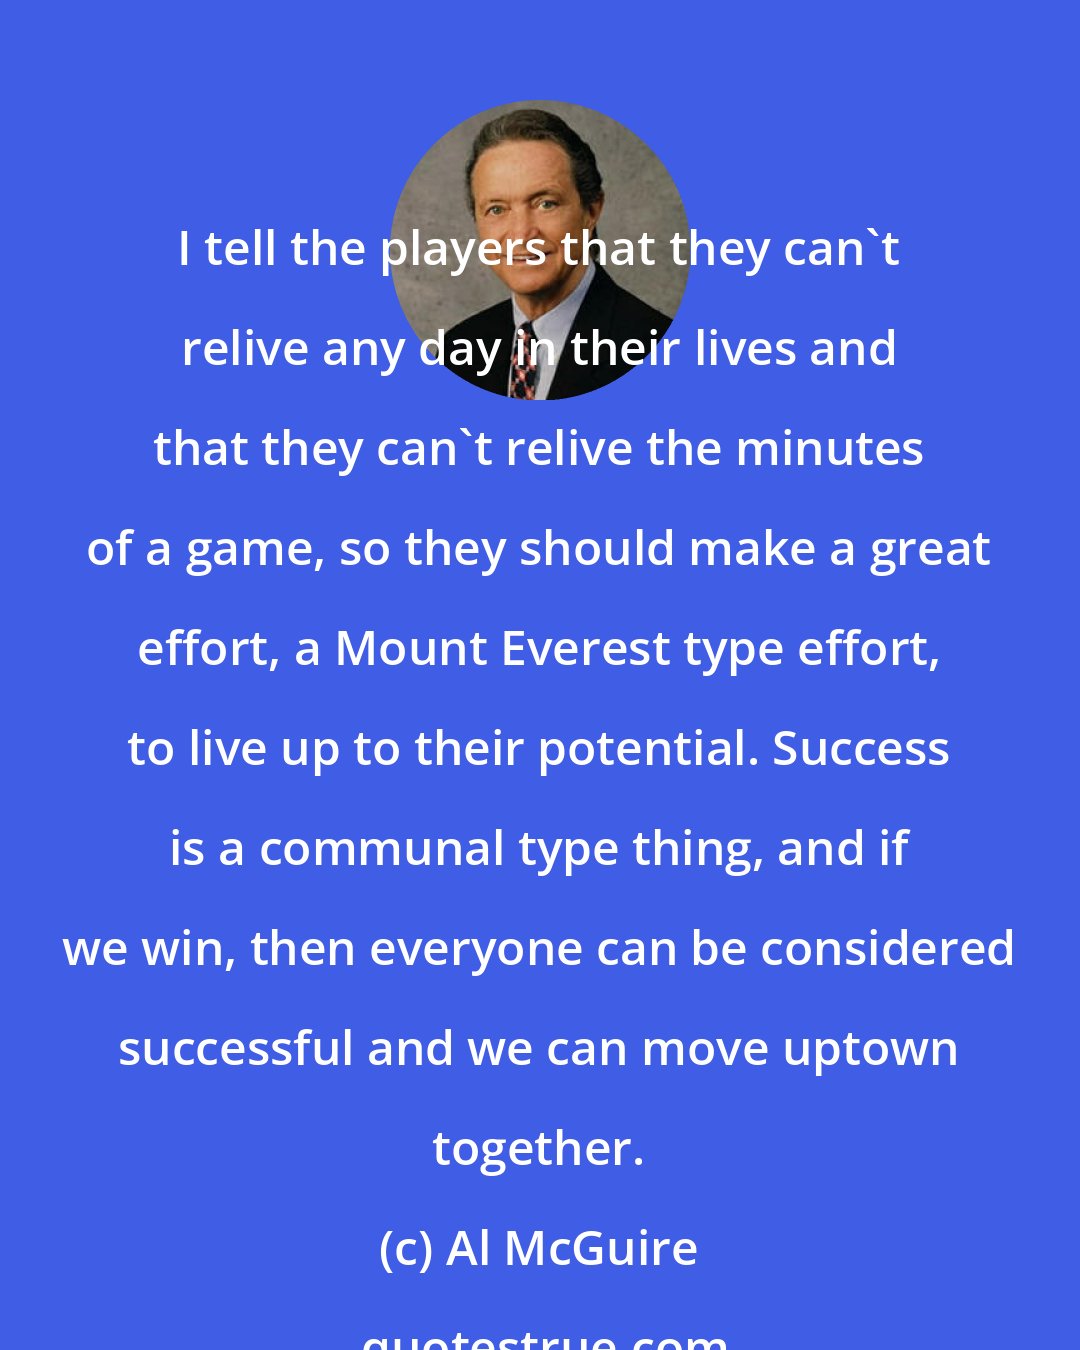 Al McGuire: I tell the players that they can't relive any day in their lives and that they can't relive the minutes of a game, so they should make a great effort, a Mount Everest type effort, to live up to their potential. Success is a communal type thing, and if we win, then everyone can be considered successful and we can move uptown together.